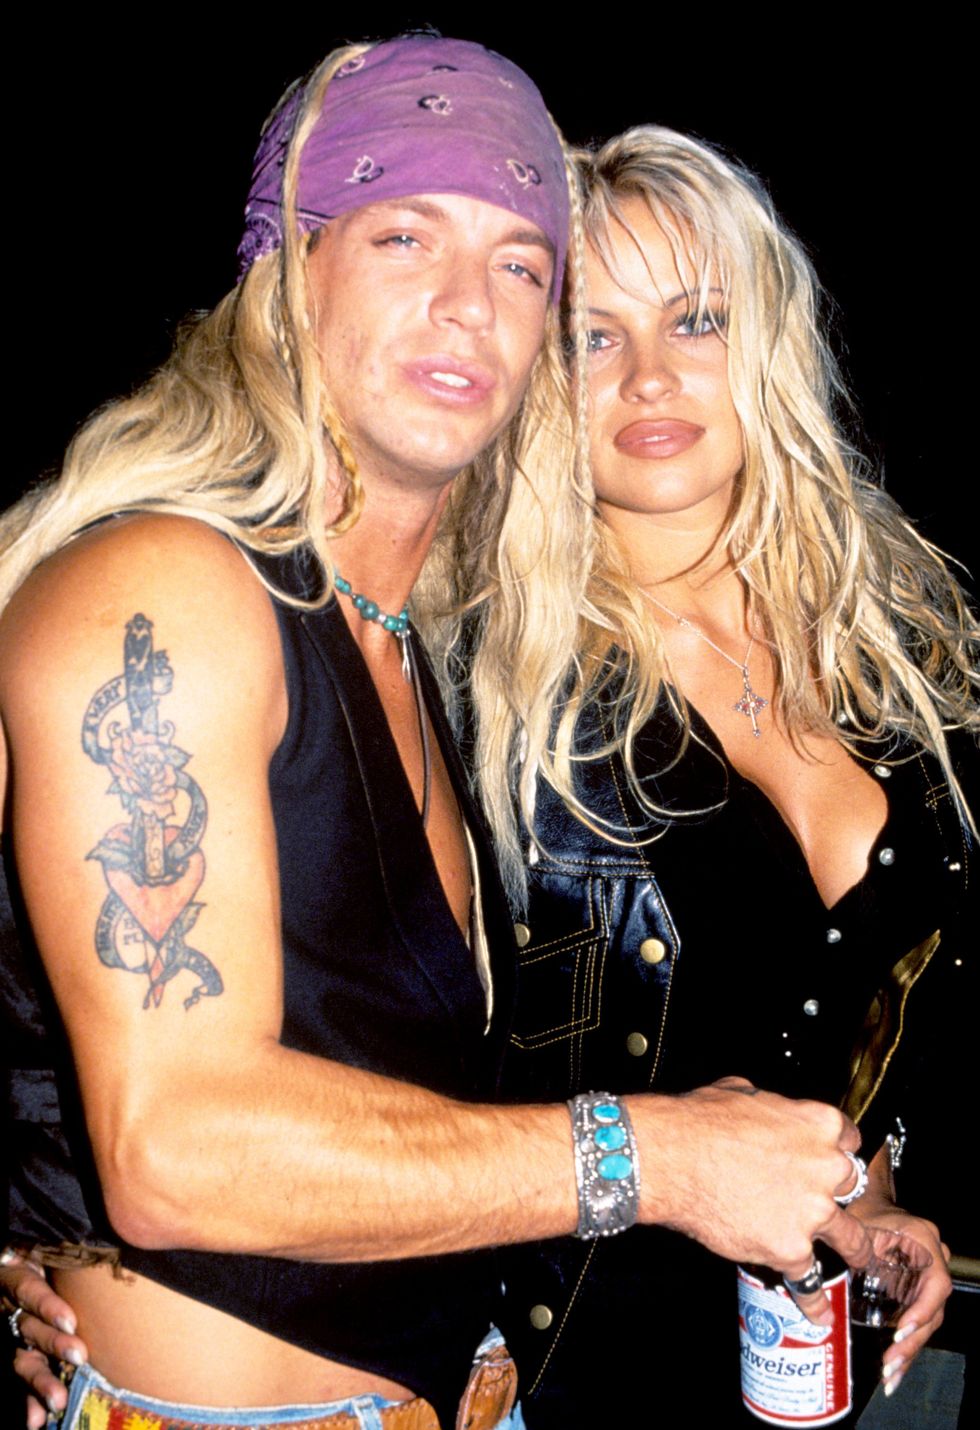 bret michaels of poison and pamela anderson photo by s granitzwireimage